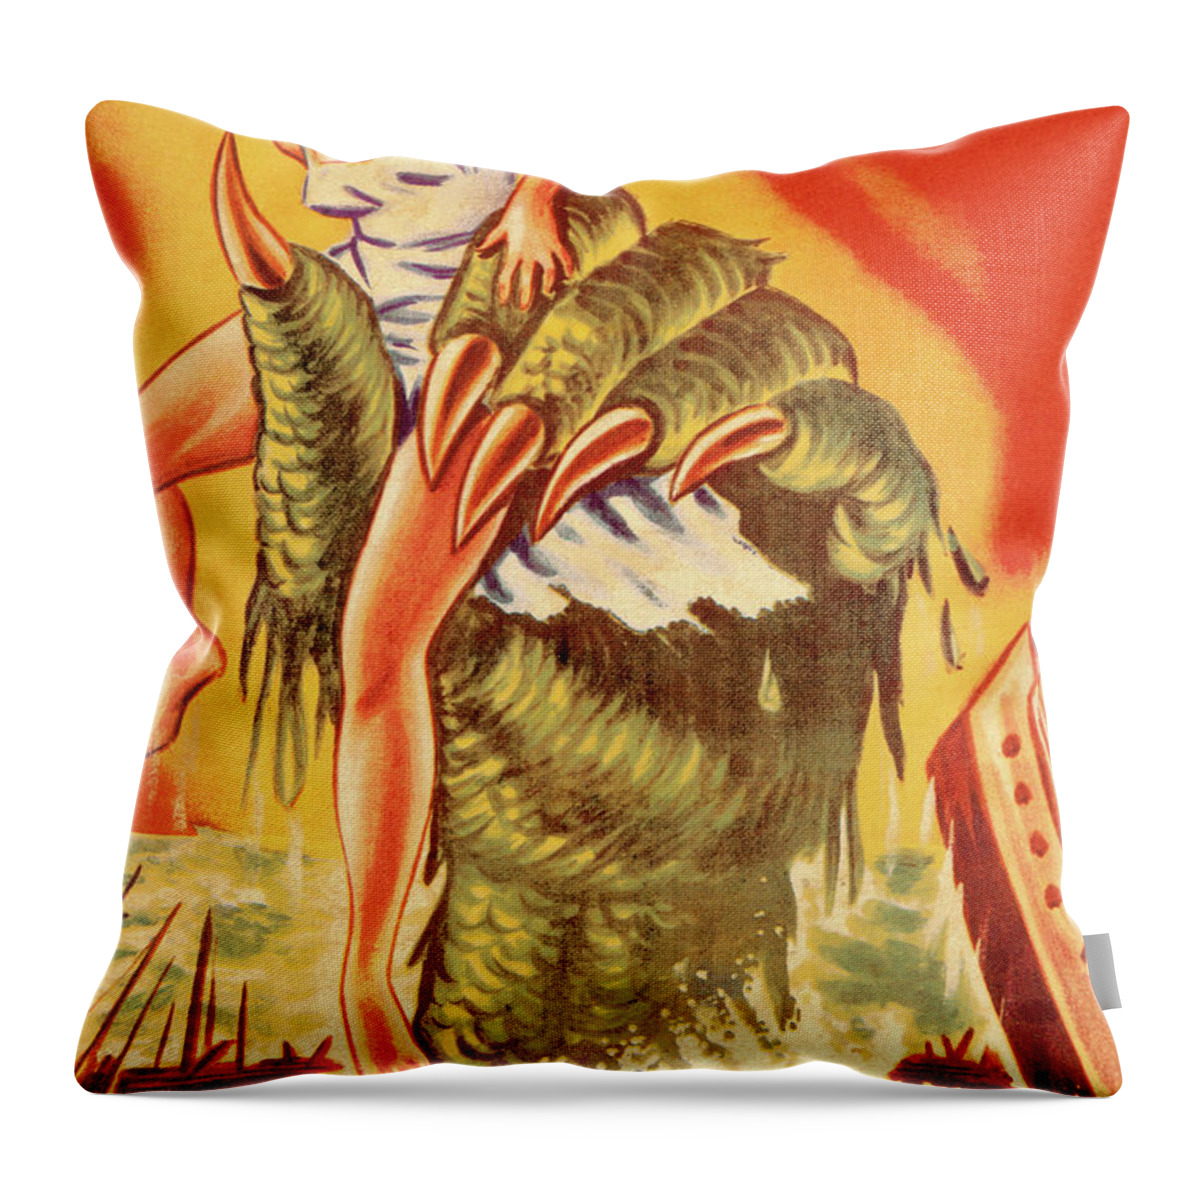 Abduction Throw Pillow featuring the drawing Sea Monster Grabbing Woman by CSA Images